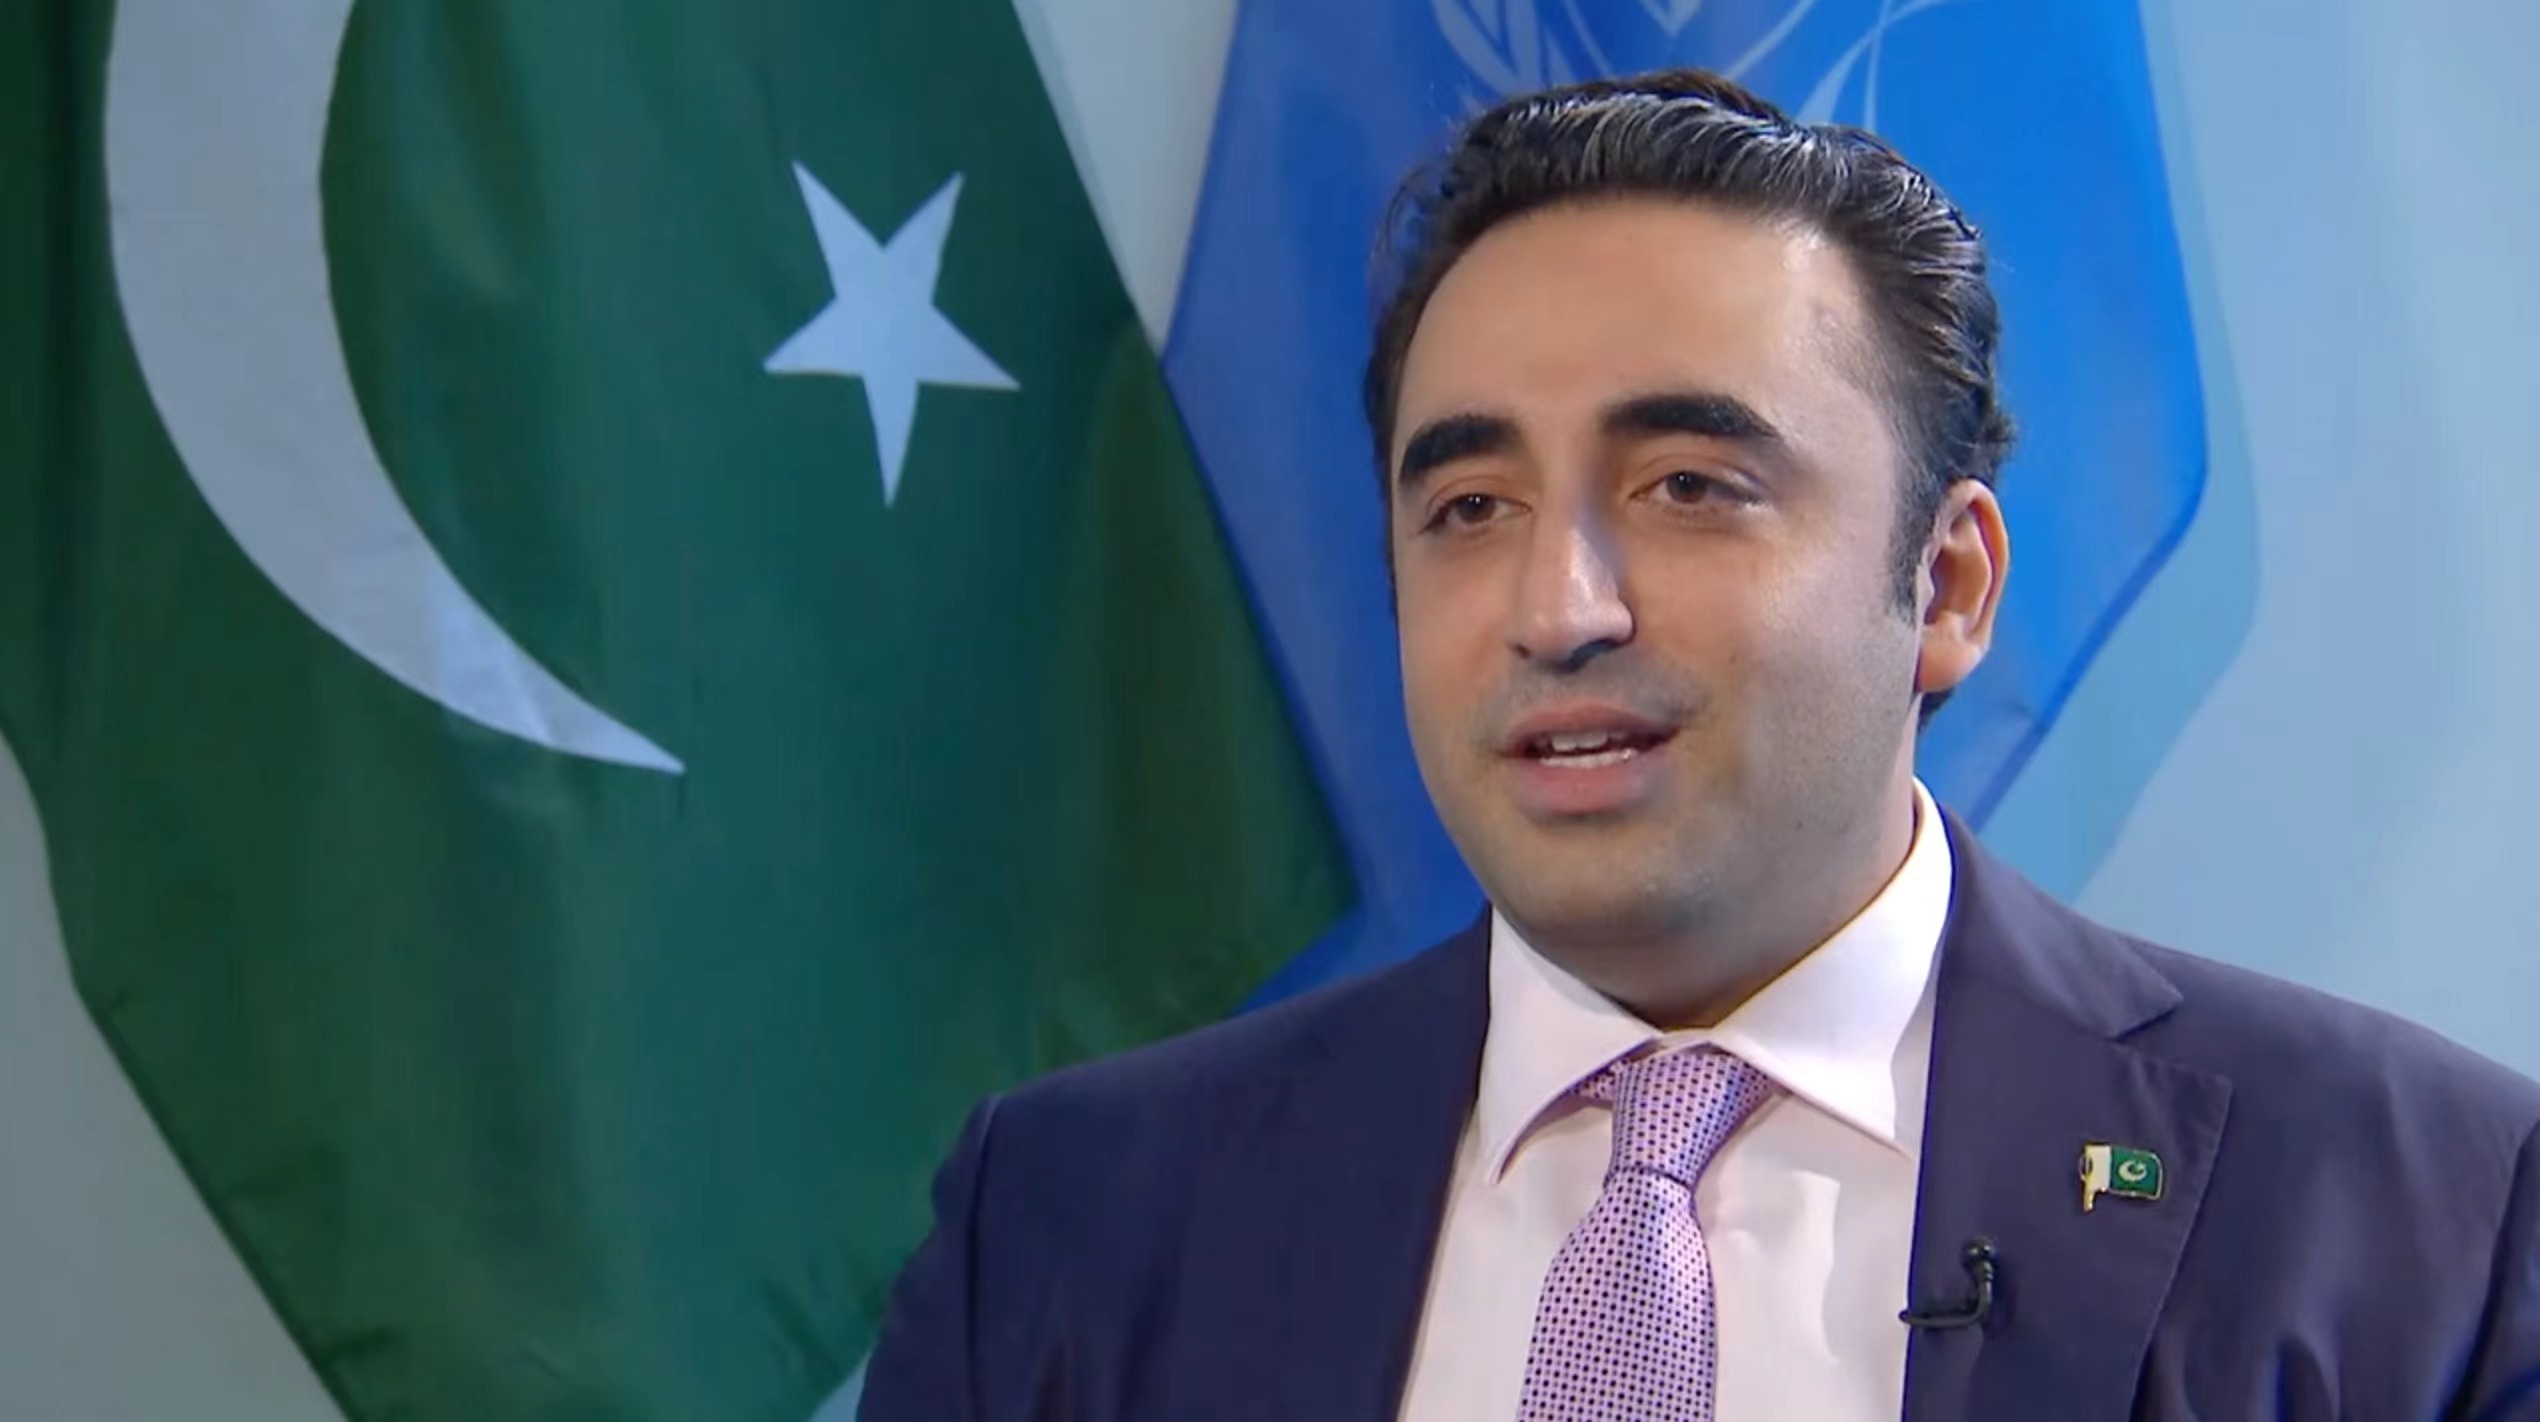 Pak foreign minister Bilawal Bhutto